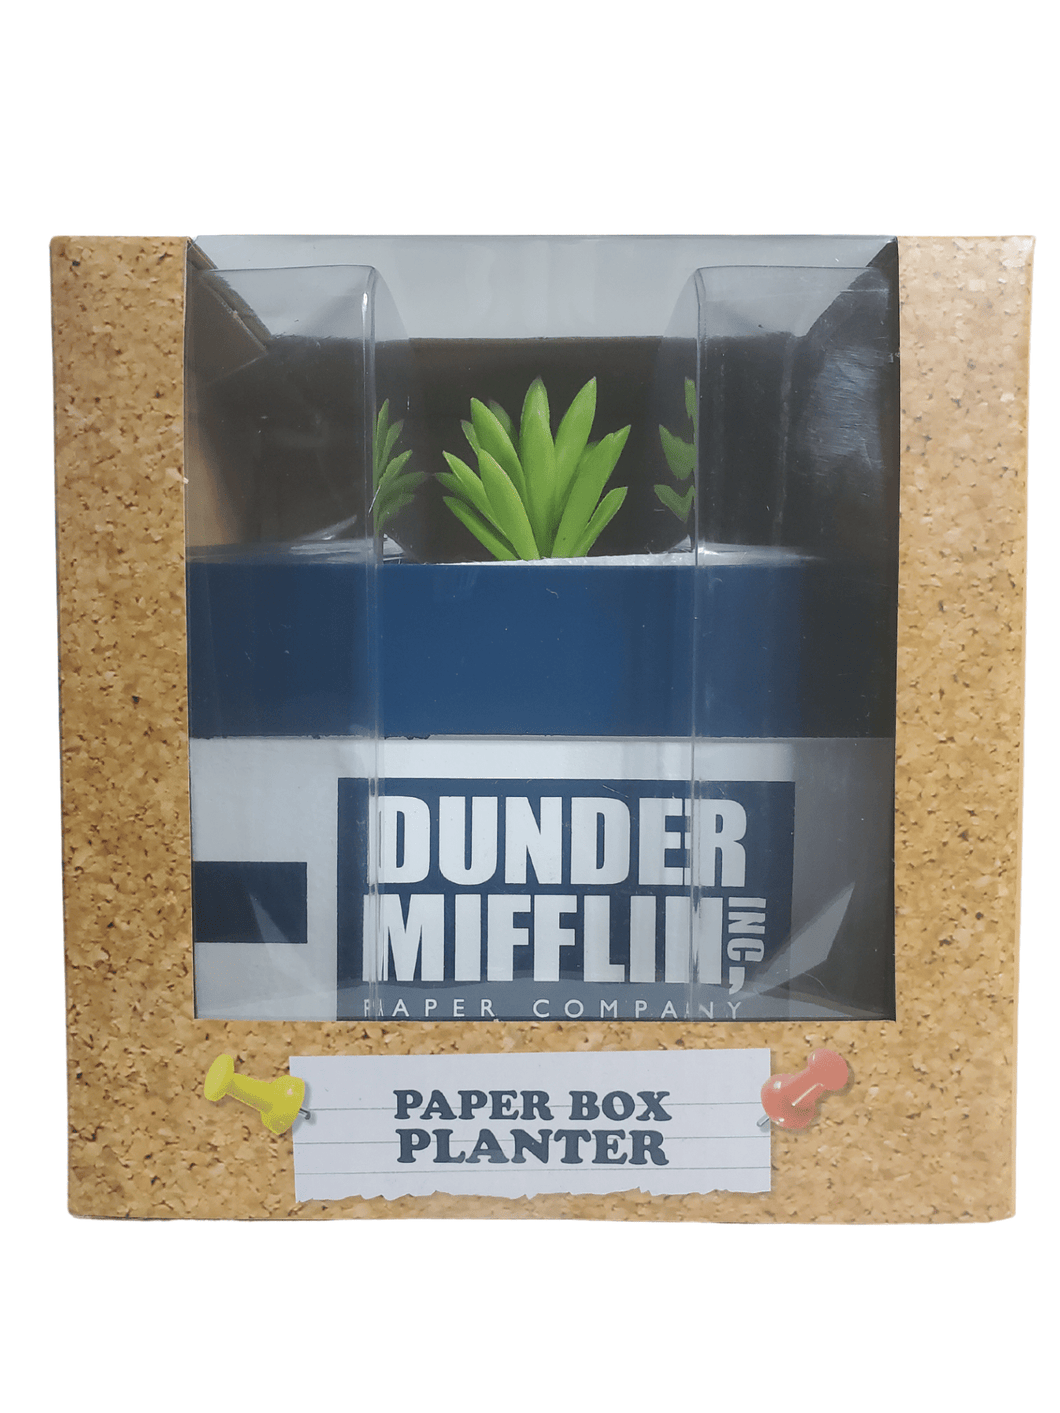 The Office CultureFly Planter Paper box Planter